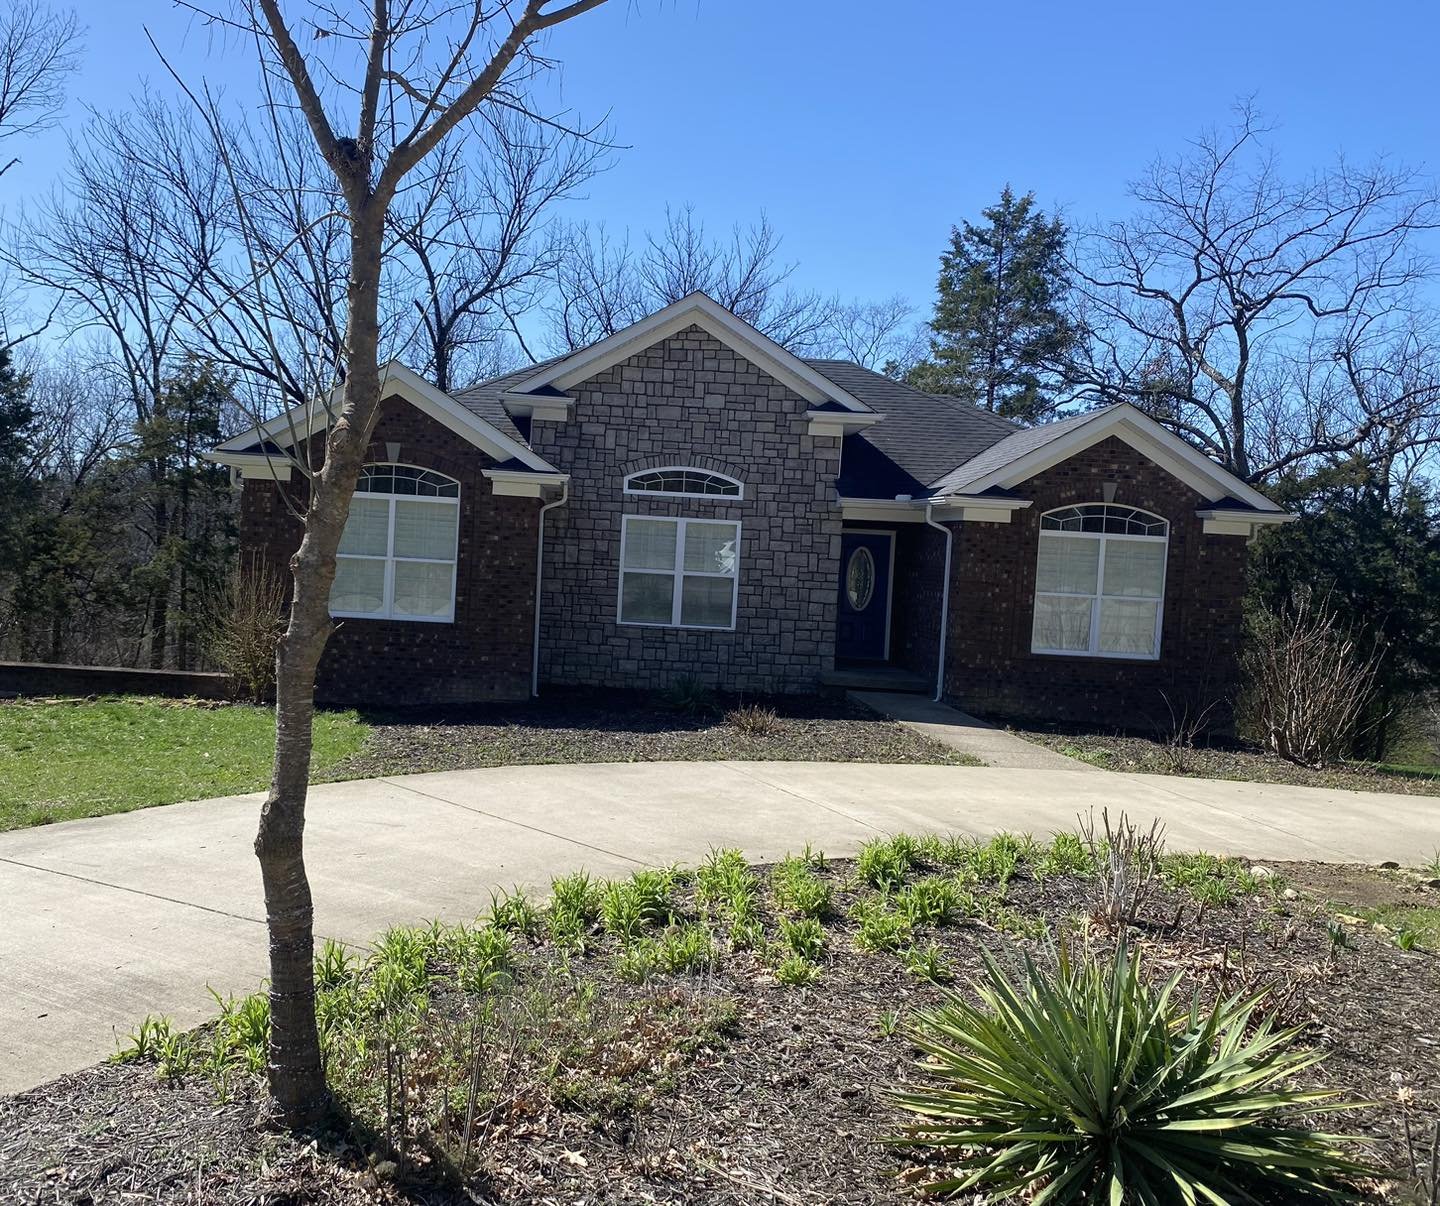 🌷🌸🌷 Let's go take a look at 307 Creekside Drive in historic Bardstown, Ky offered by Mike &amp; Kathy Ballard of Area One Realty!🌷🌸🌷

This beautiful home in town offers:
🌸Wonderful in town location 
🌷3BR 🛌 
🌸2BA 🛀 
🌷brick ranch style home